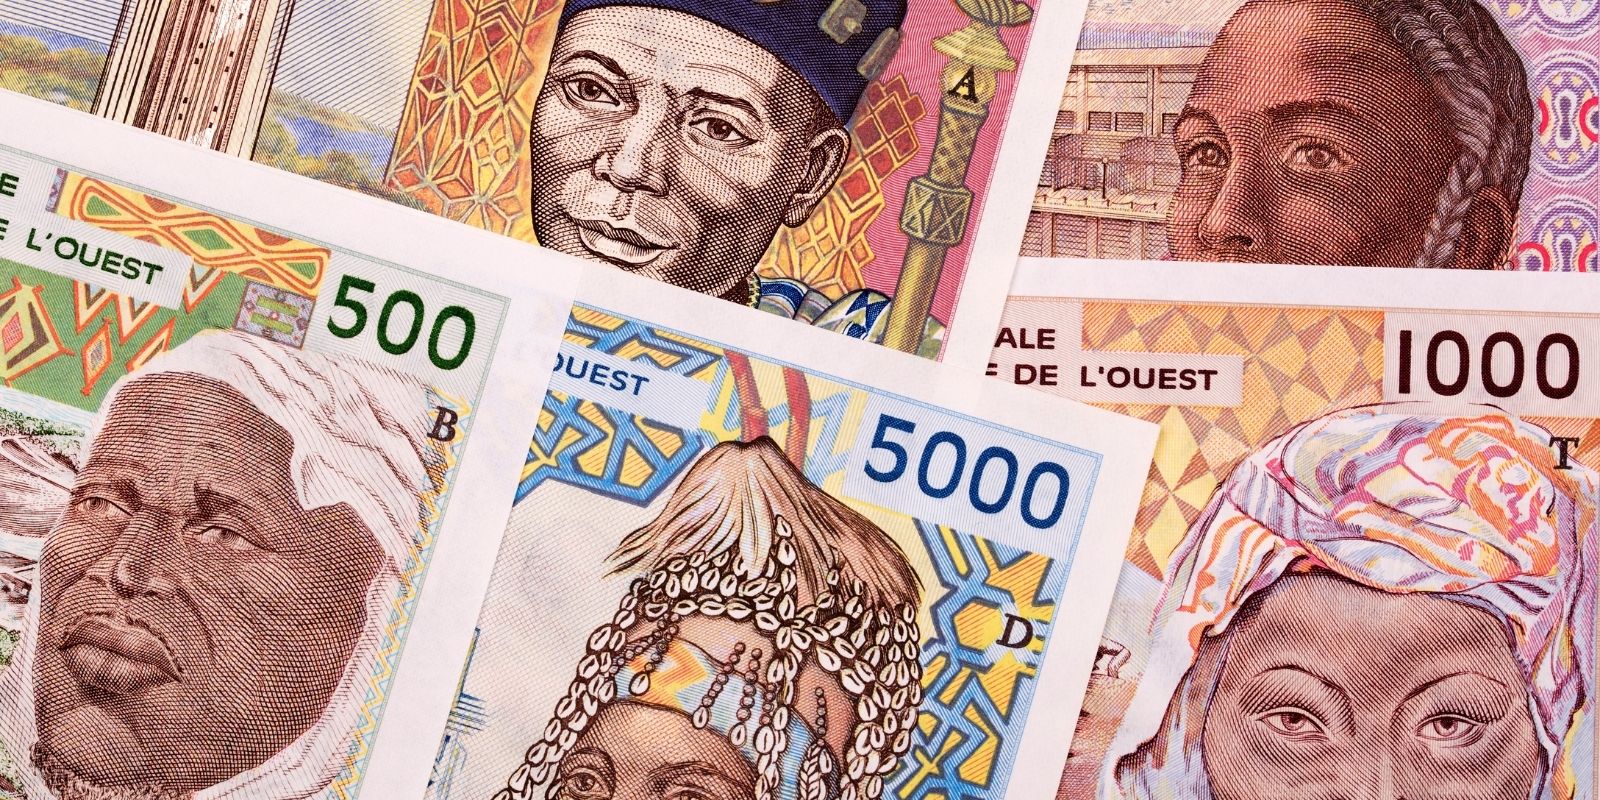 The Eco-currency is a new chapter for West Africa. www.theexchange.africa